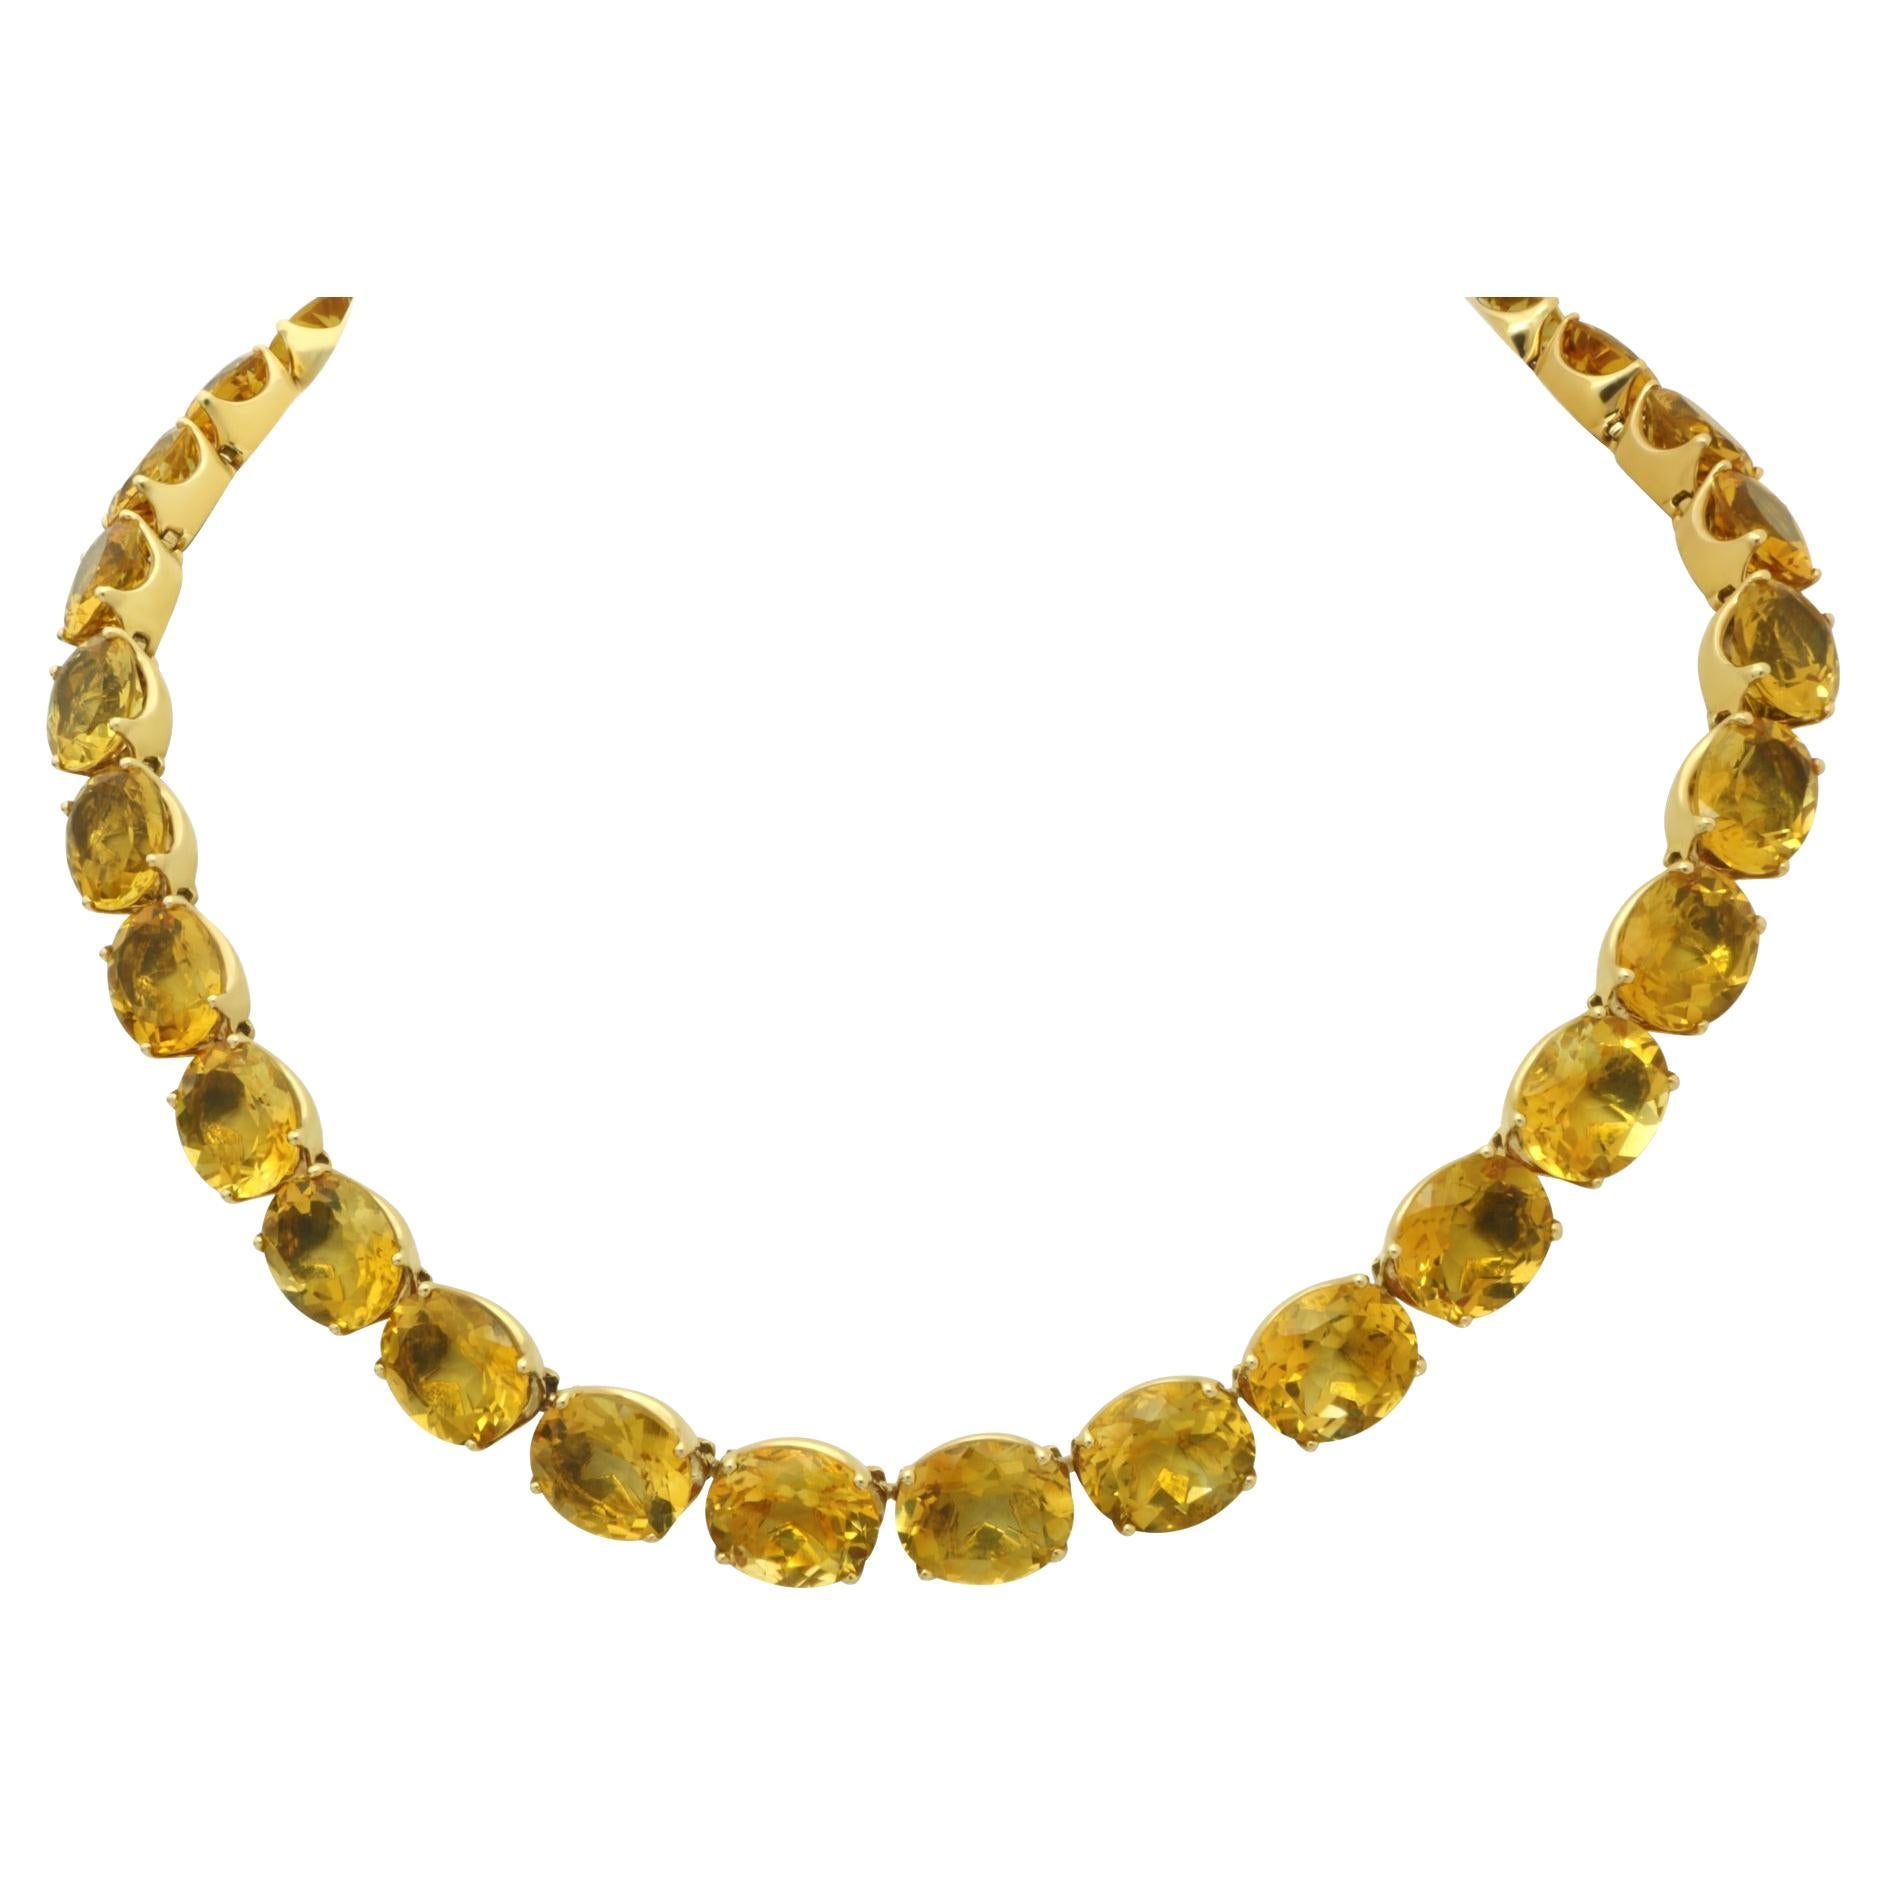 Jay Feder Vintage 137.7ct Oval Citrine 18k Yellow Gold Tennis Necklace